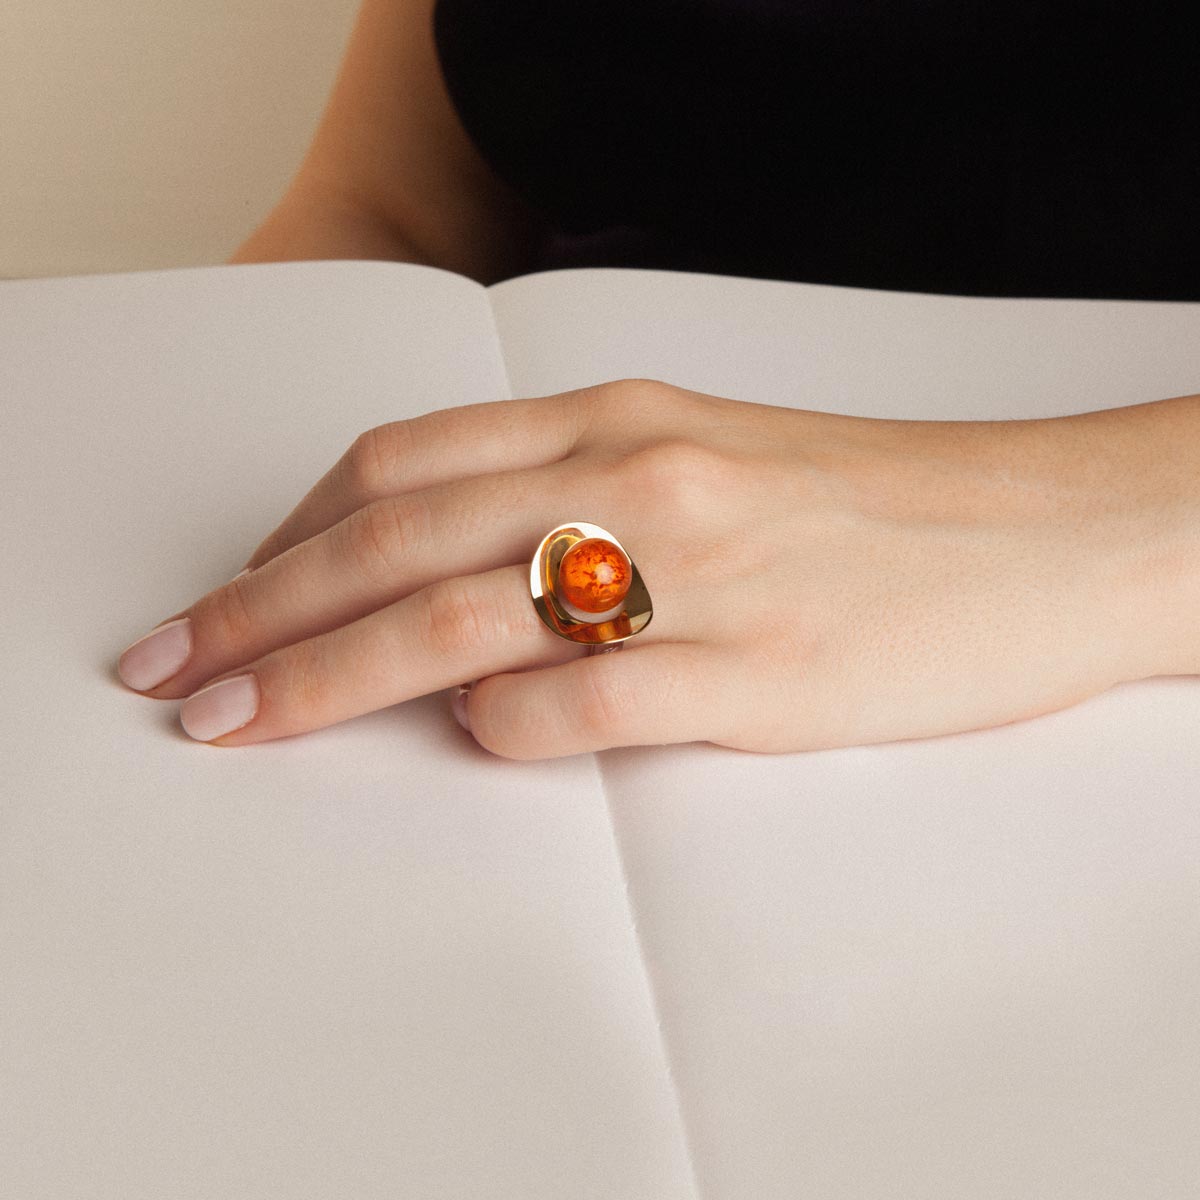 Ina handmade ring in 9k or 18k gold, sterling silver and amber designed by Belen Bajo m1